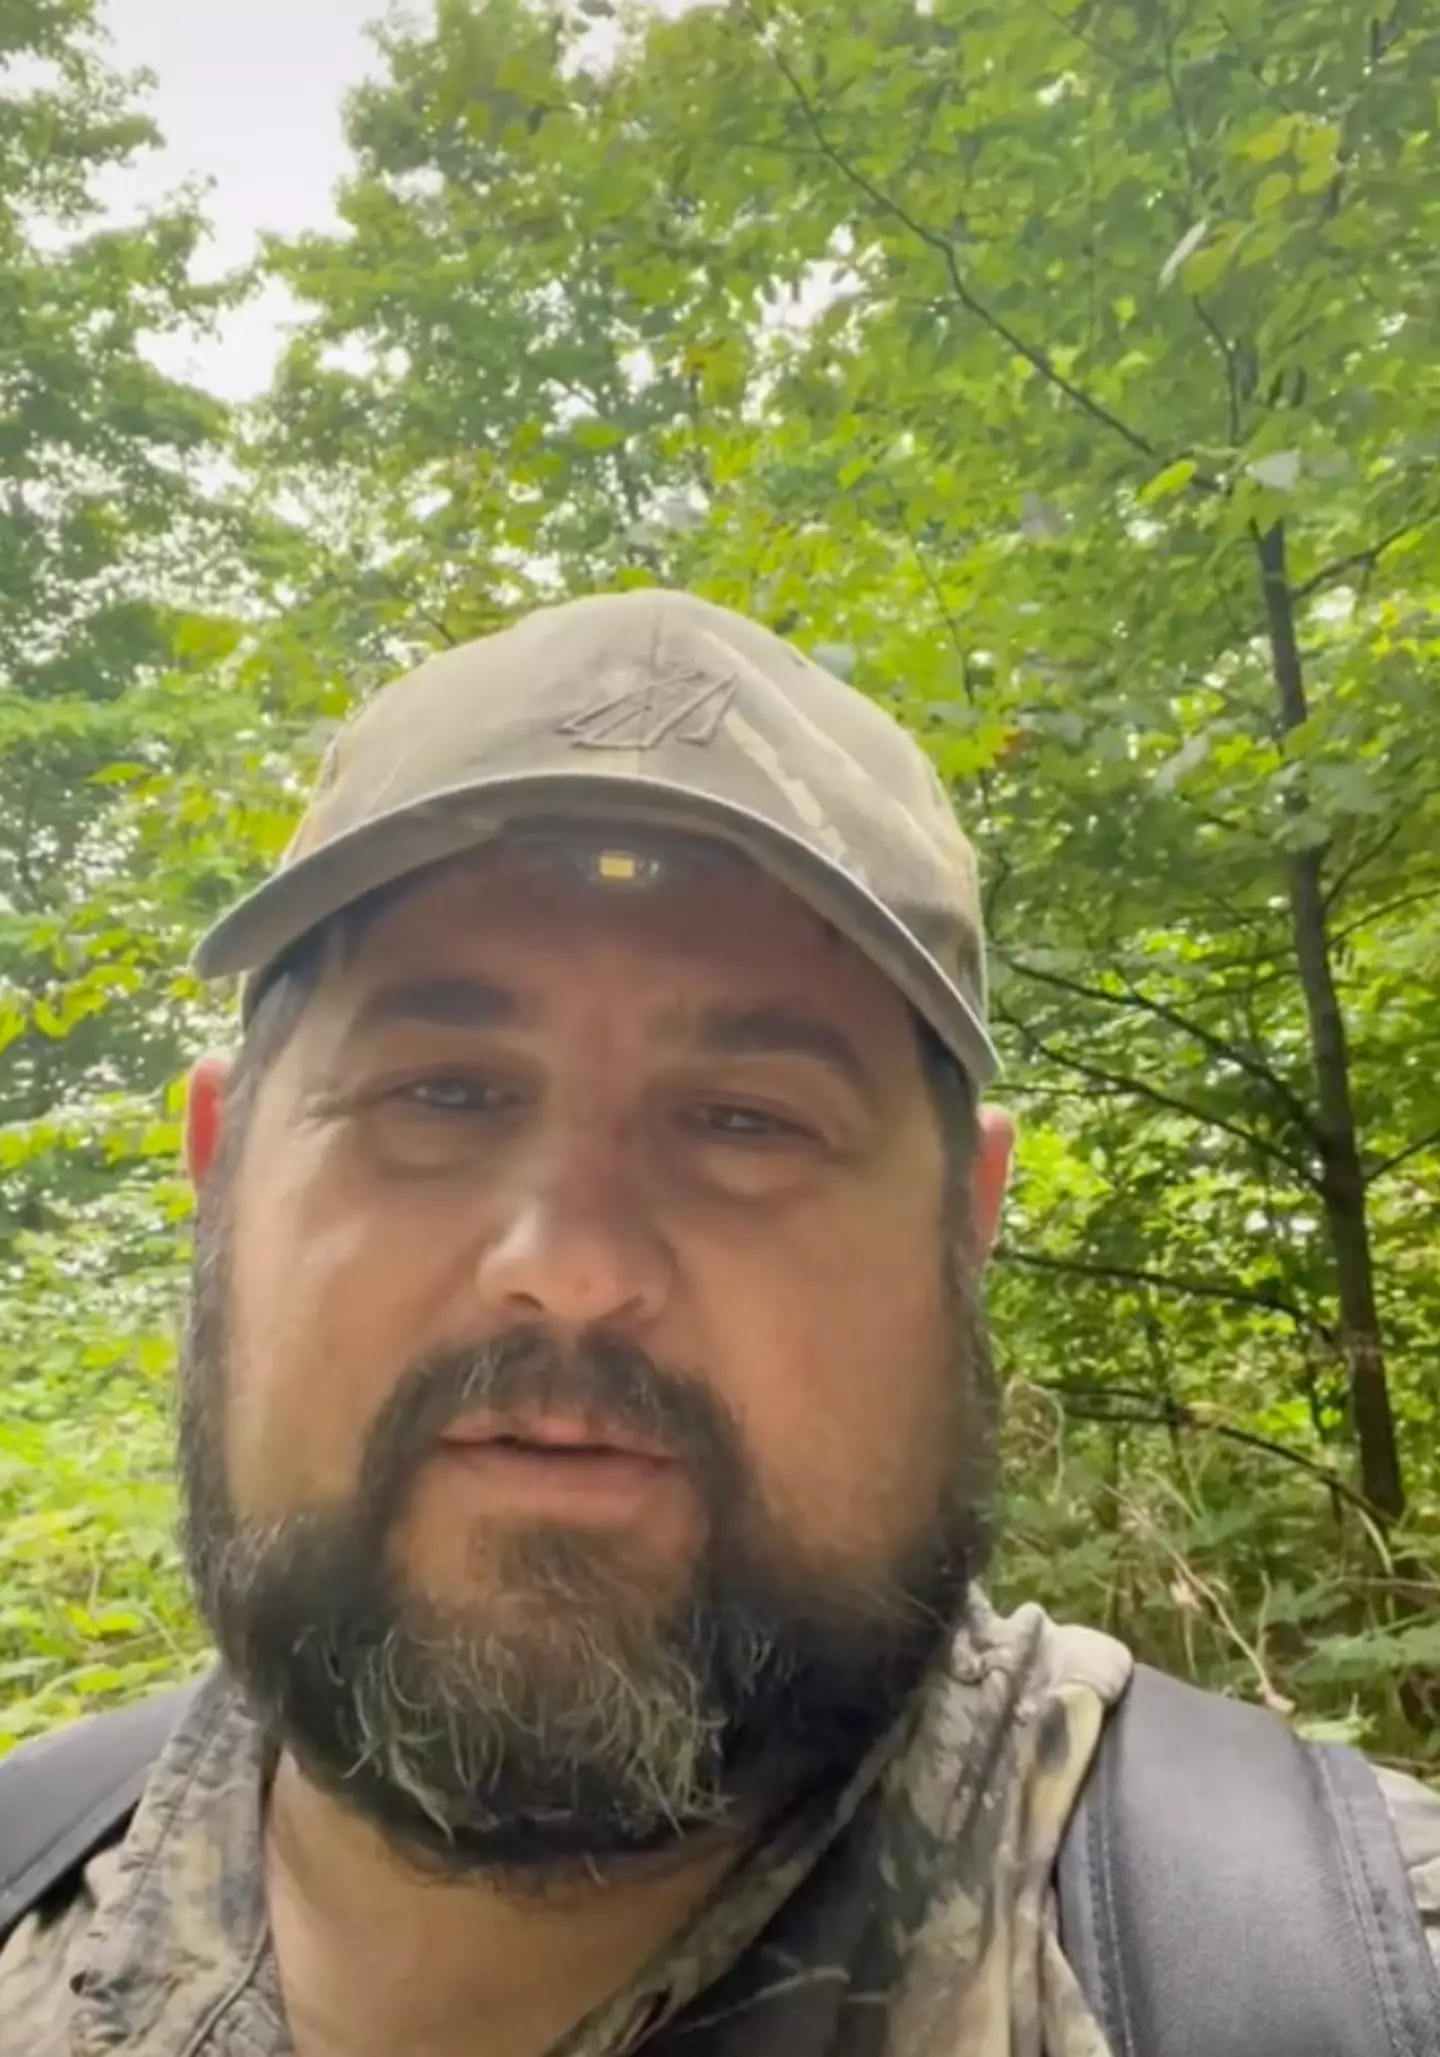 Casey Dostert has been documenting his ‘interactions’ with Bigfoot on TikTok.